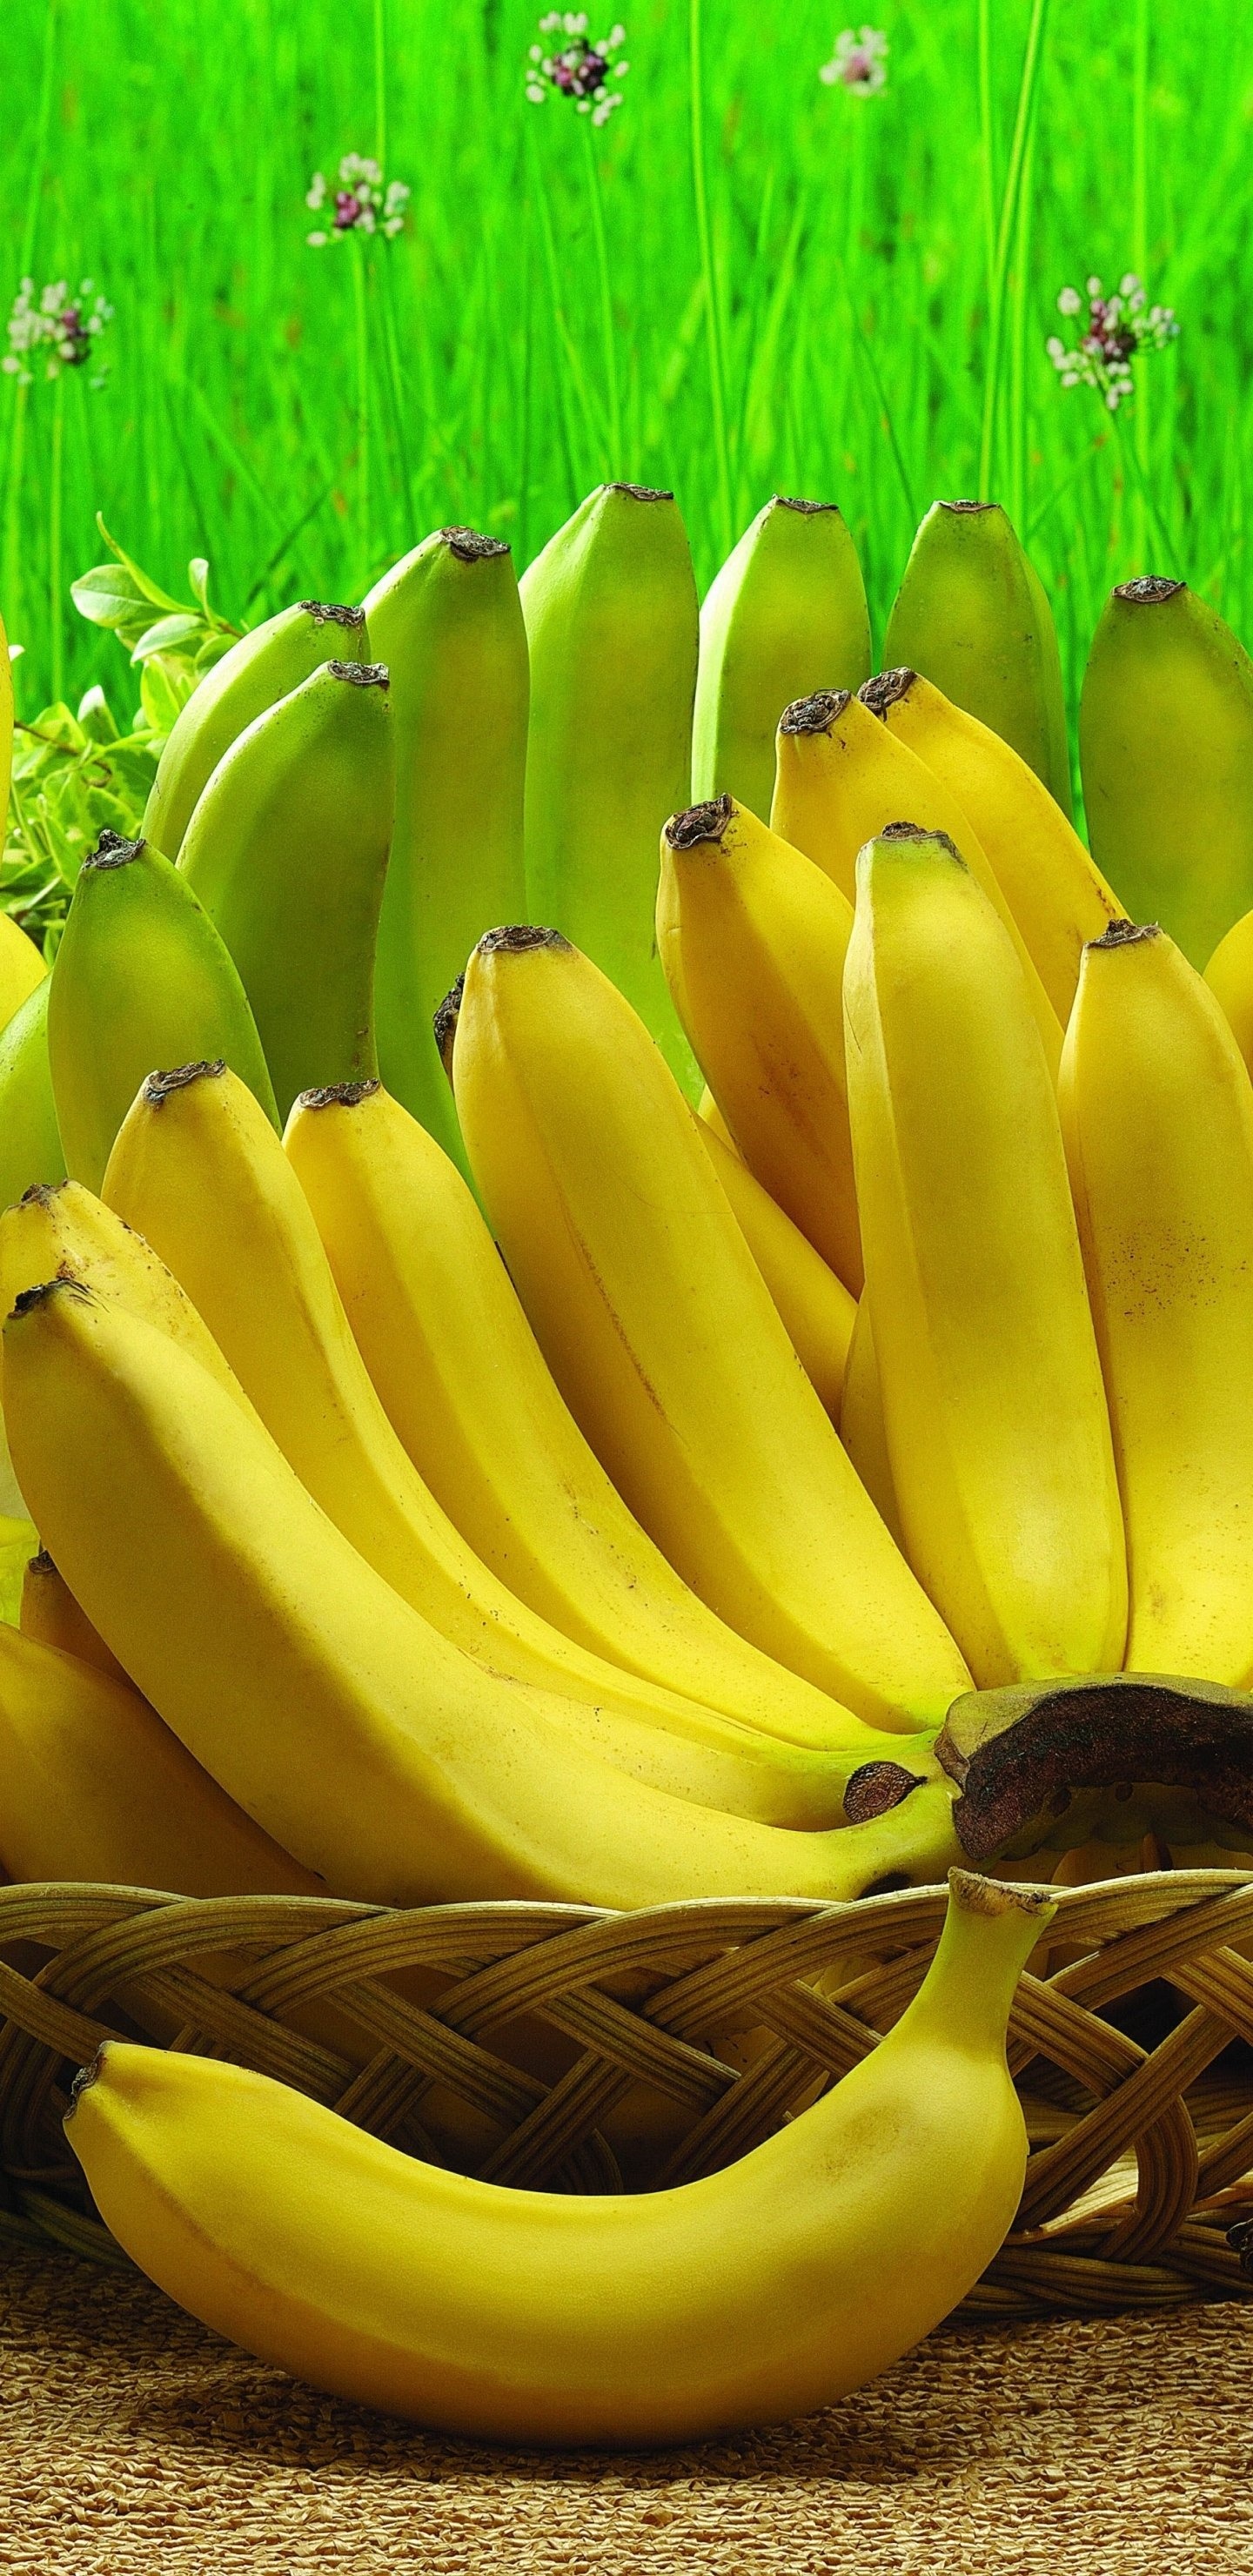 Banana feast, Culinary delight, Nutritious goodness, Finger-licking satisfaction, 1440x2960 HD Handy